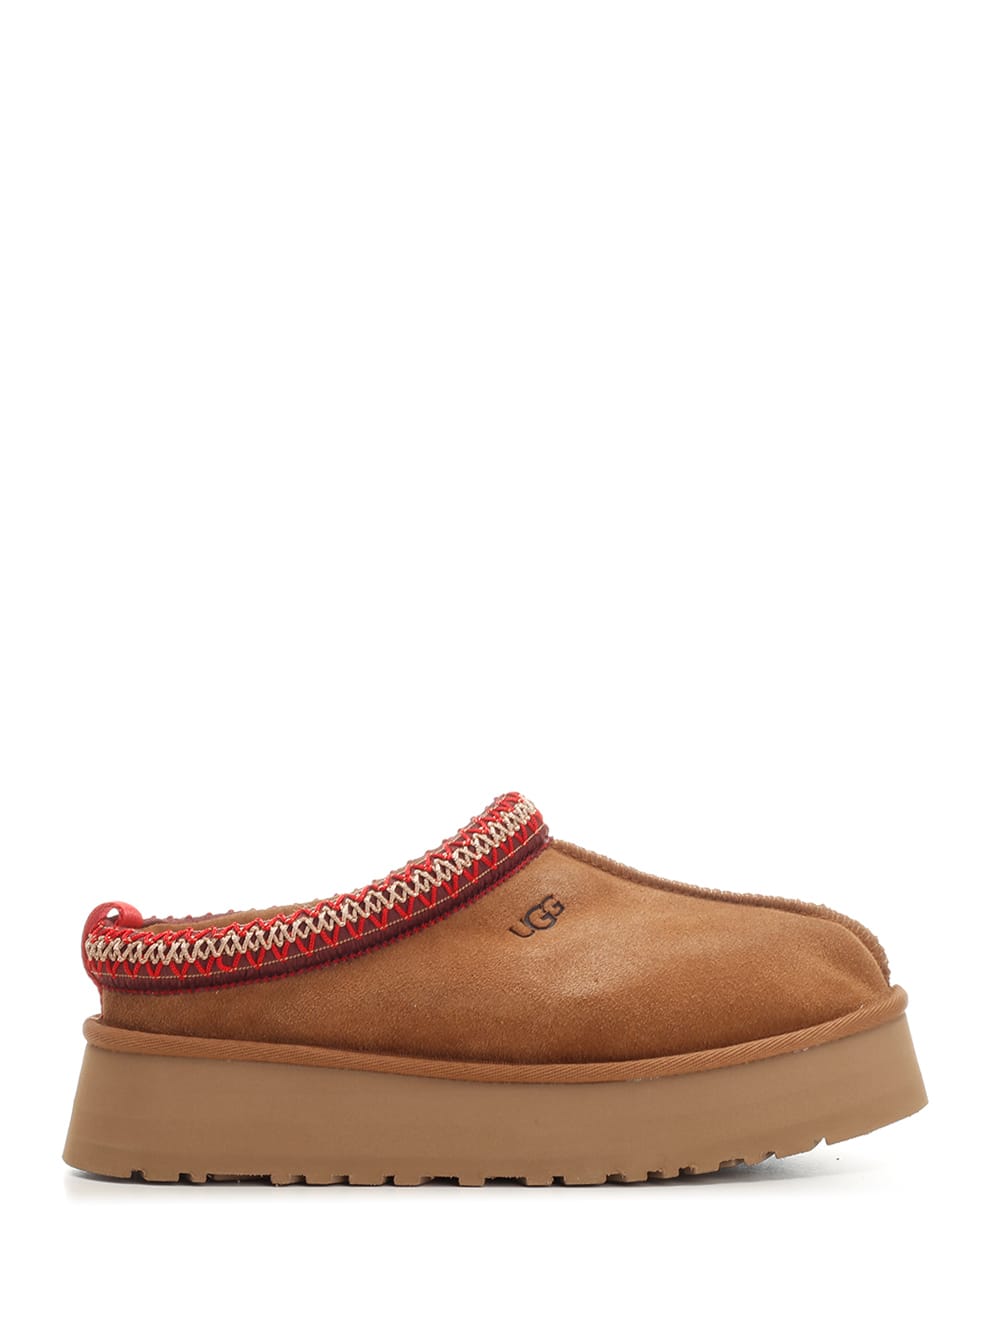 tazz Slip On Shoes